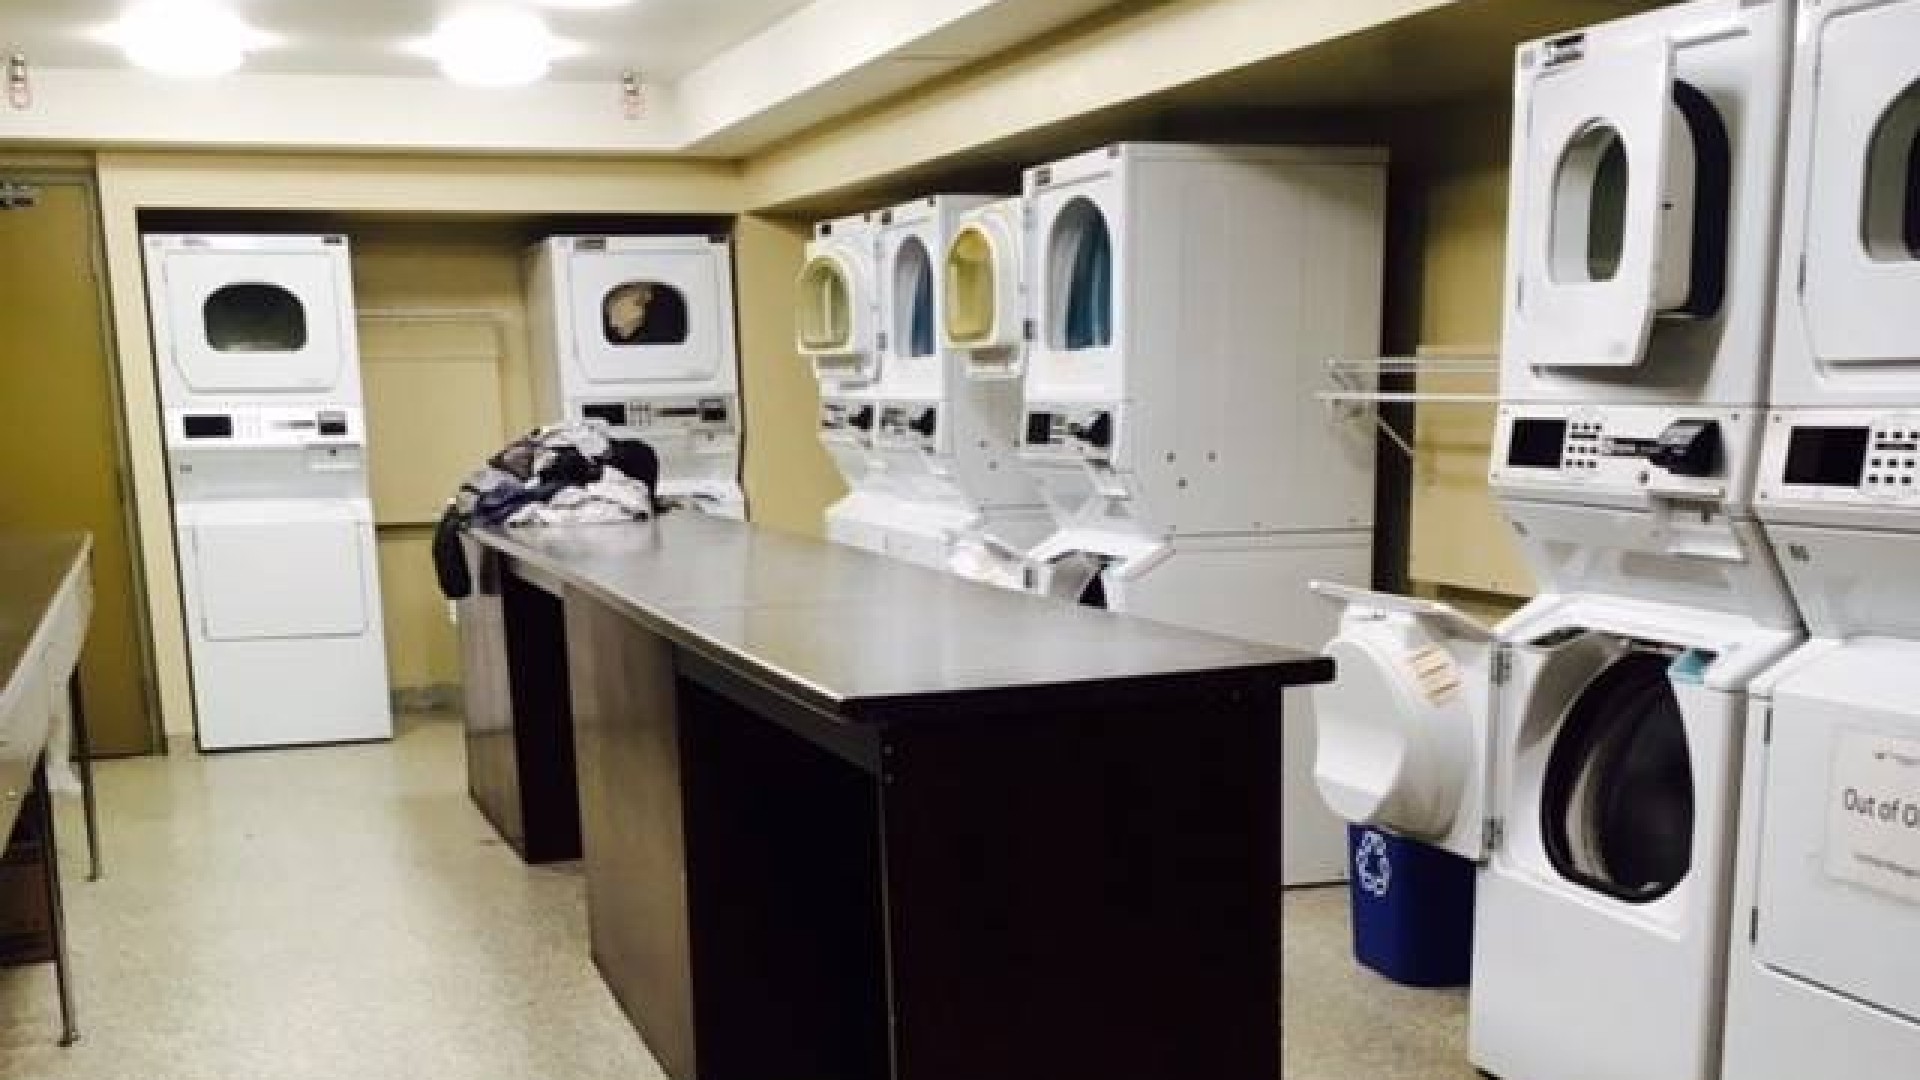 Laundry room with washers and dryers lined up and a counter in the center of the room.